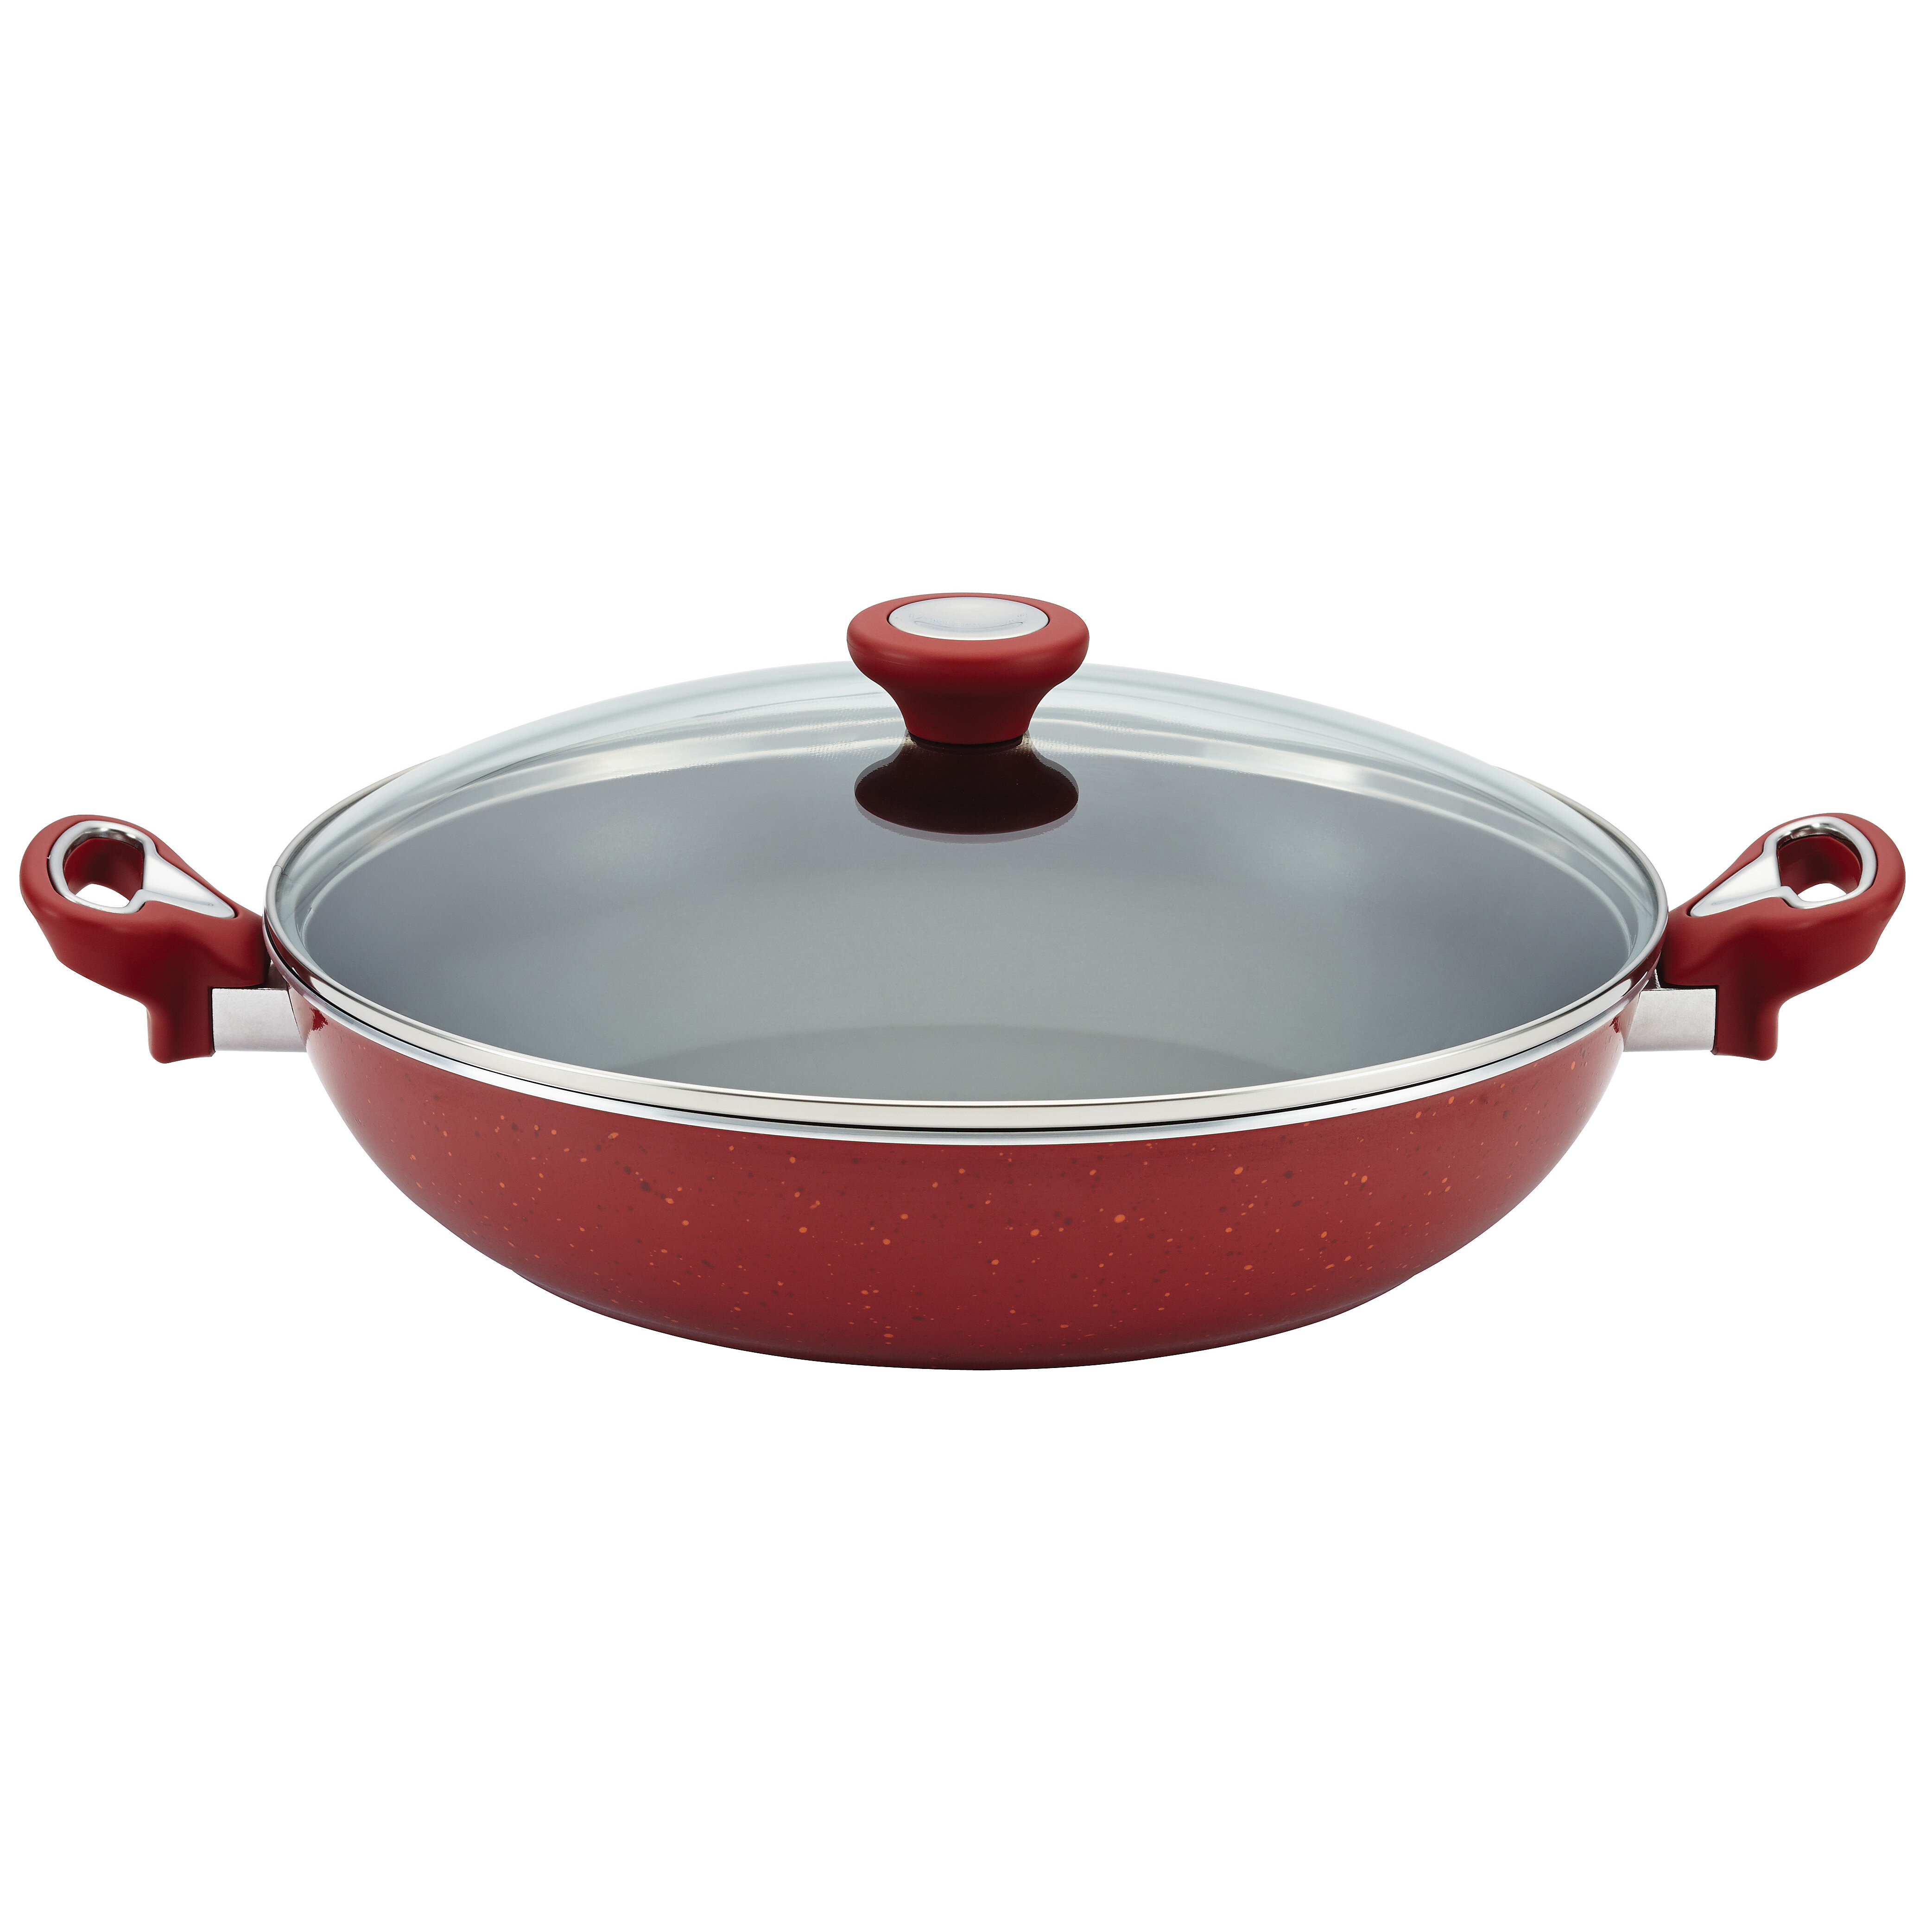 Farberware 14-inch Easy Clean Non-Stick Family Pan Cooker with Lid, Red